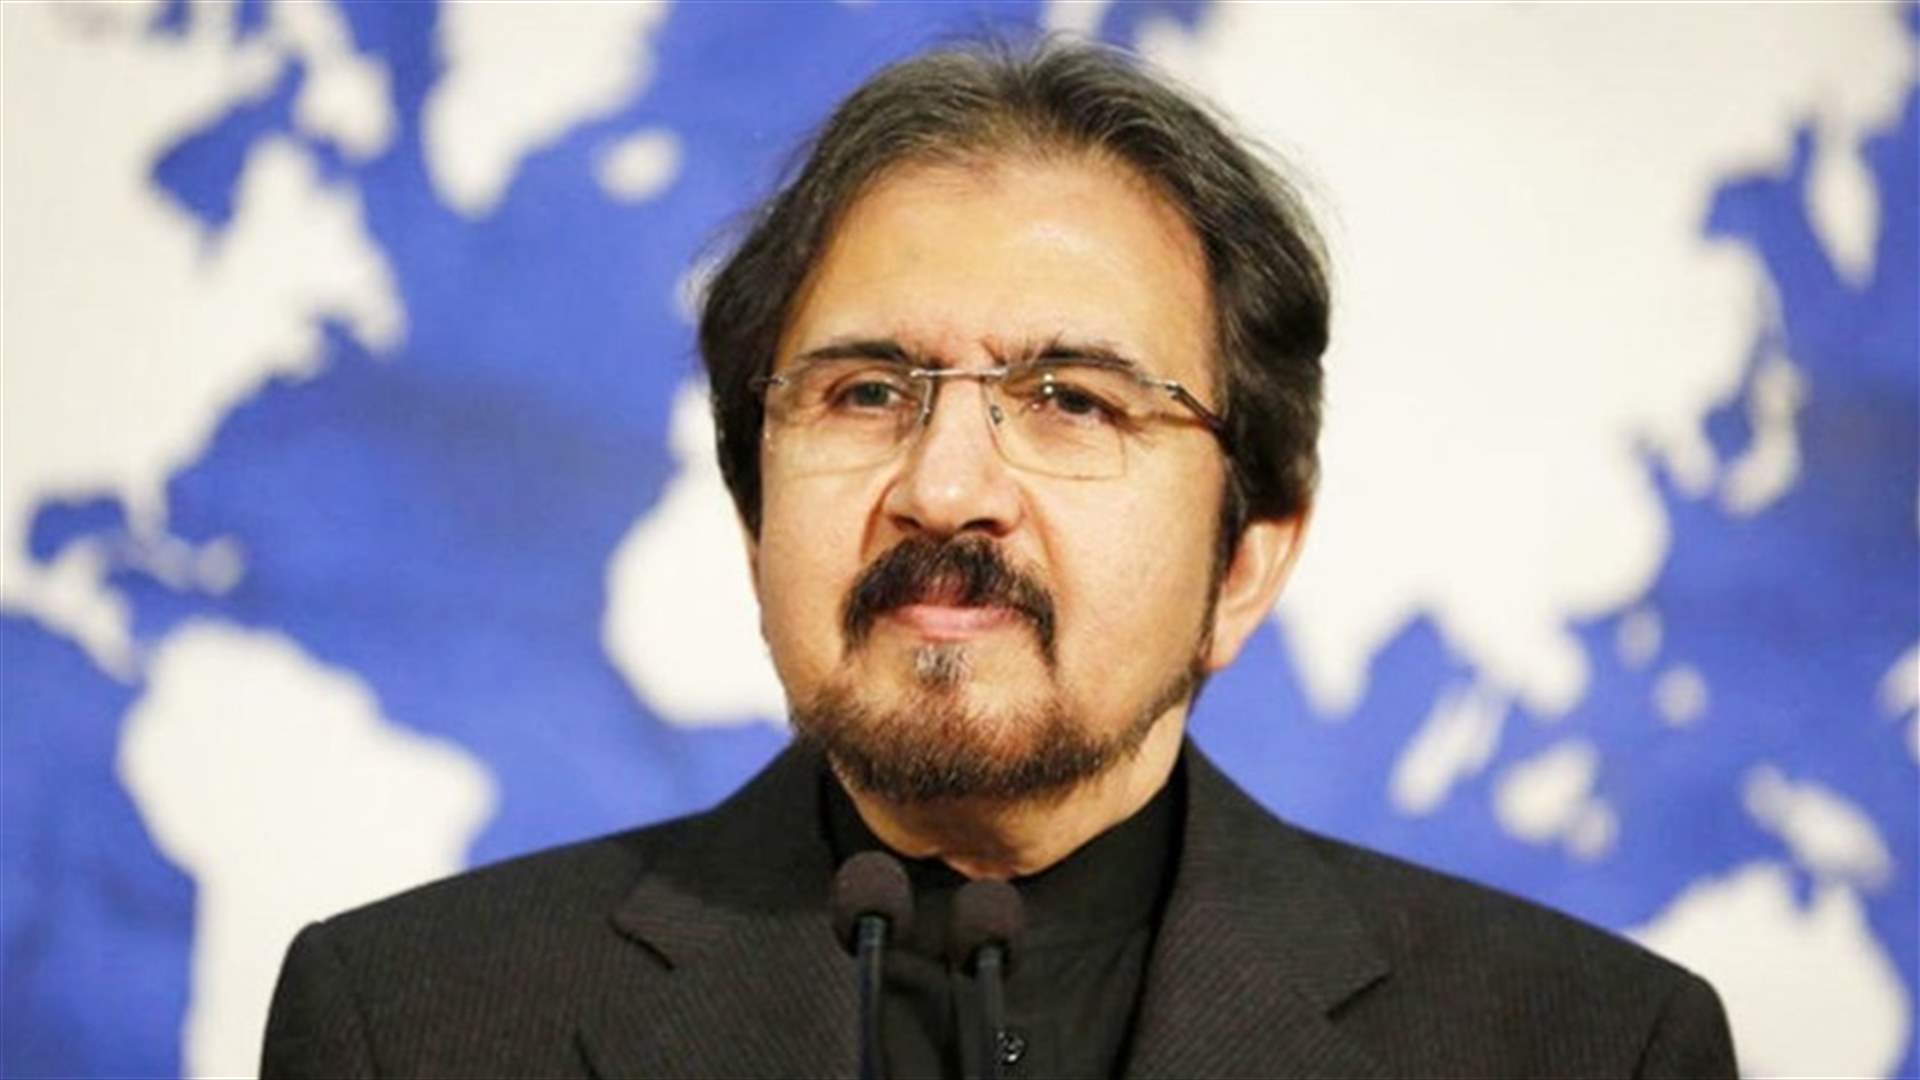 Iran has never requested a meeting with Trump - foreign ministry spokesman